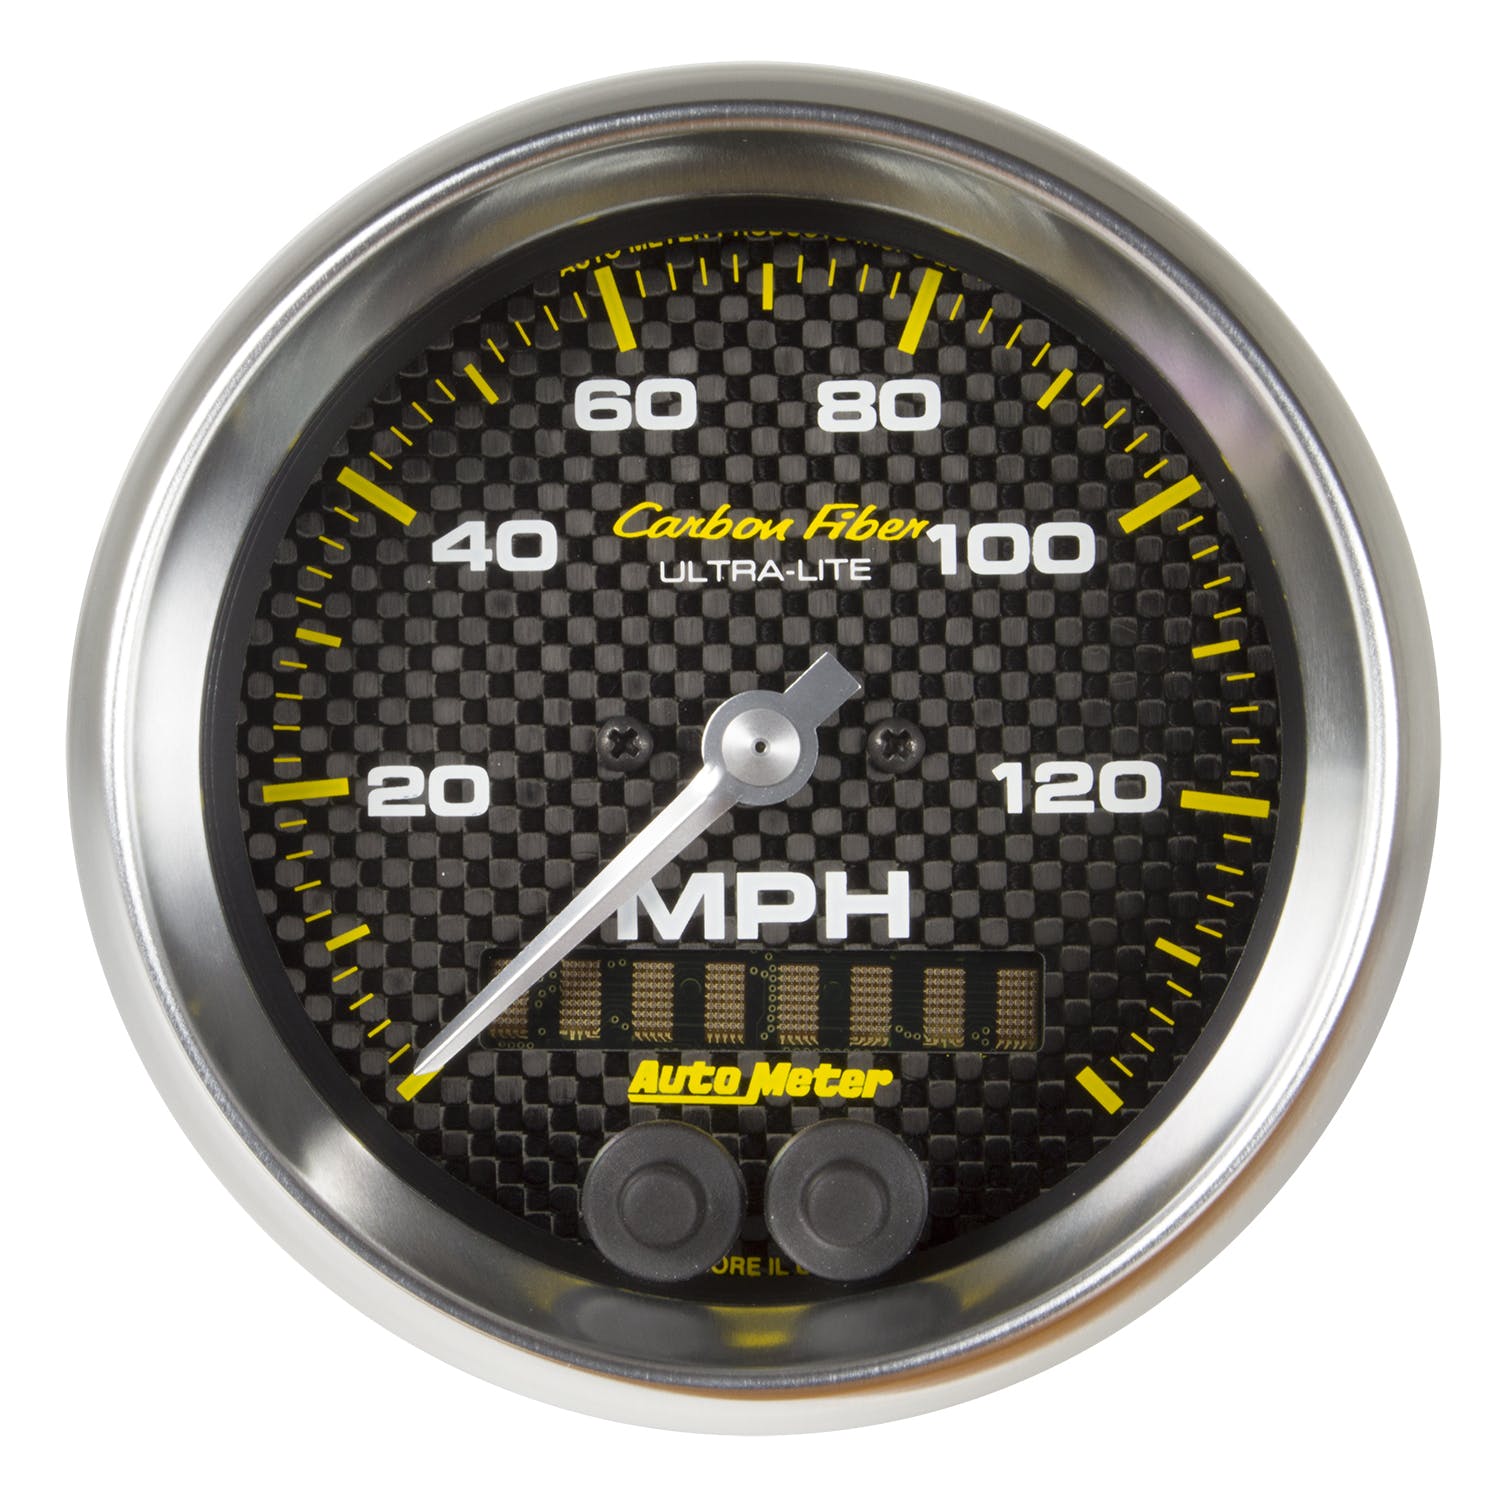 AutoMeter Products 4780 Speedometer Gauge, 3 3/8in, 140mph, GPS, Carbon Fiber